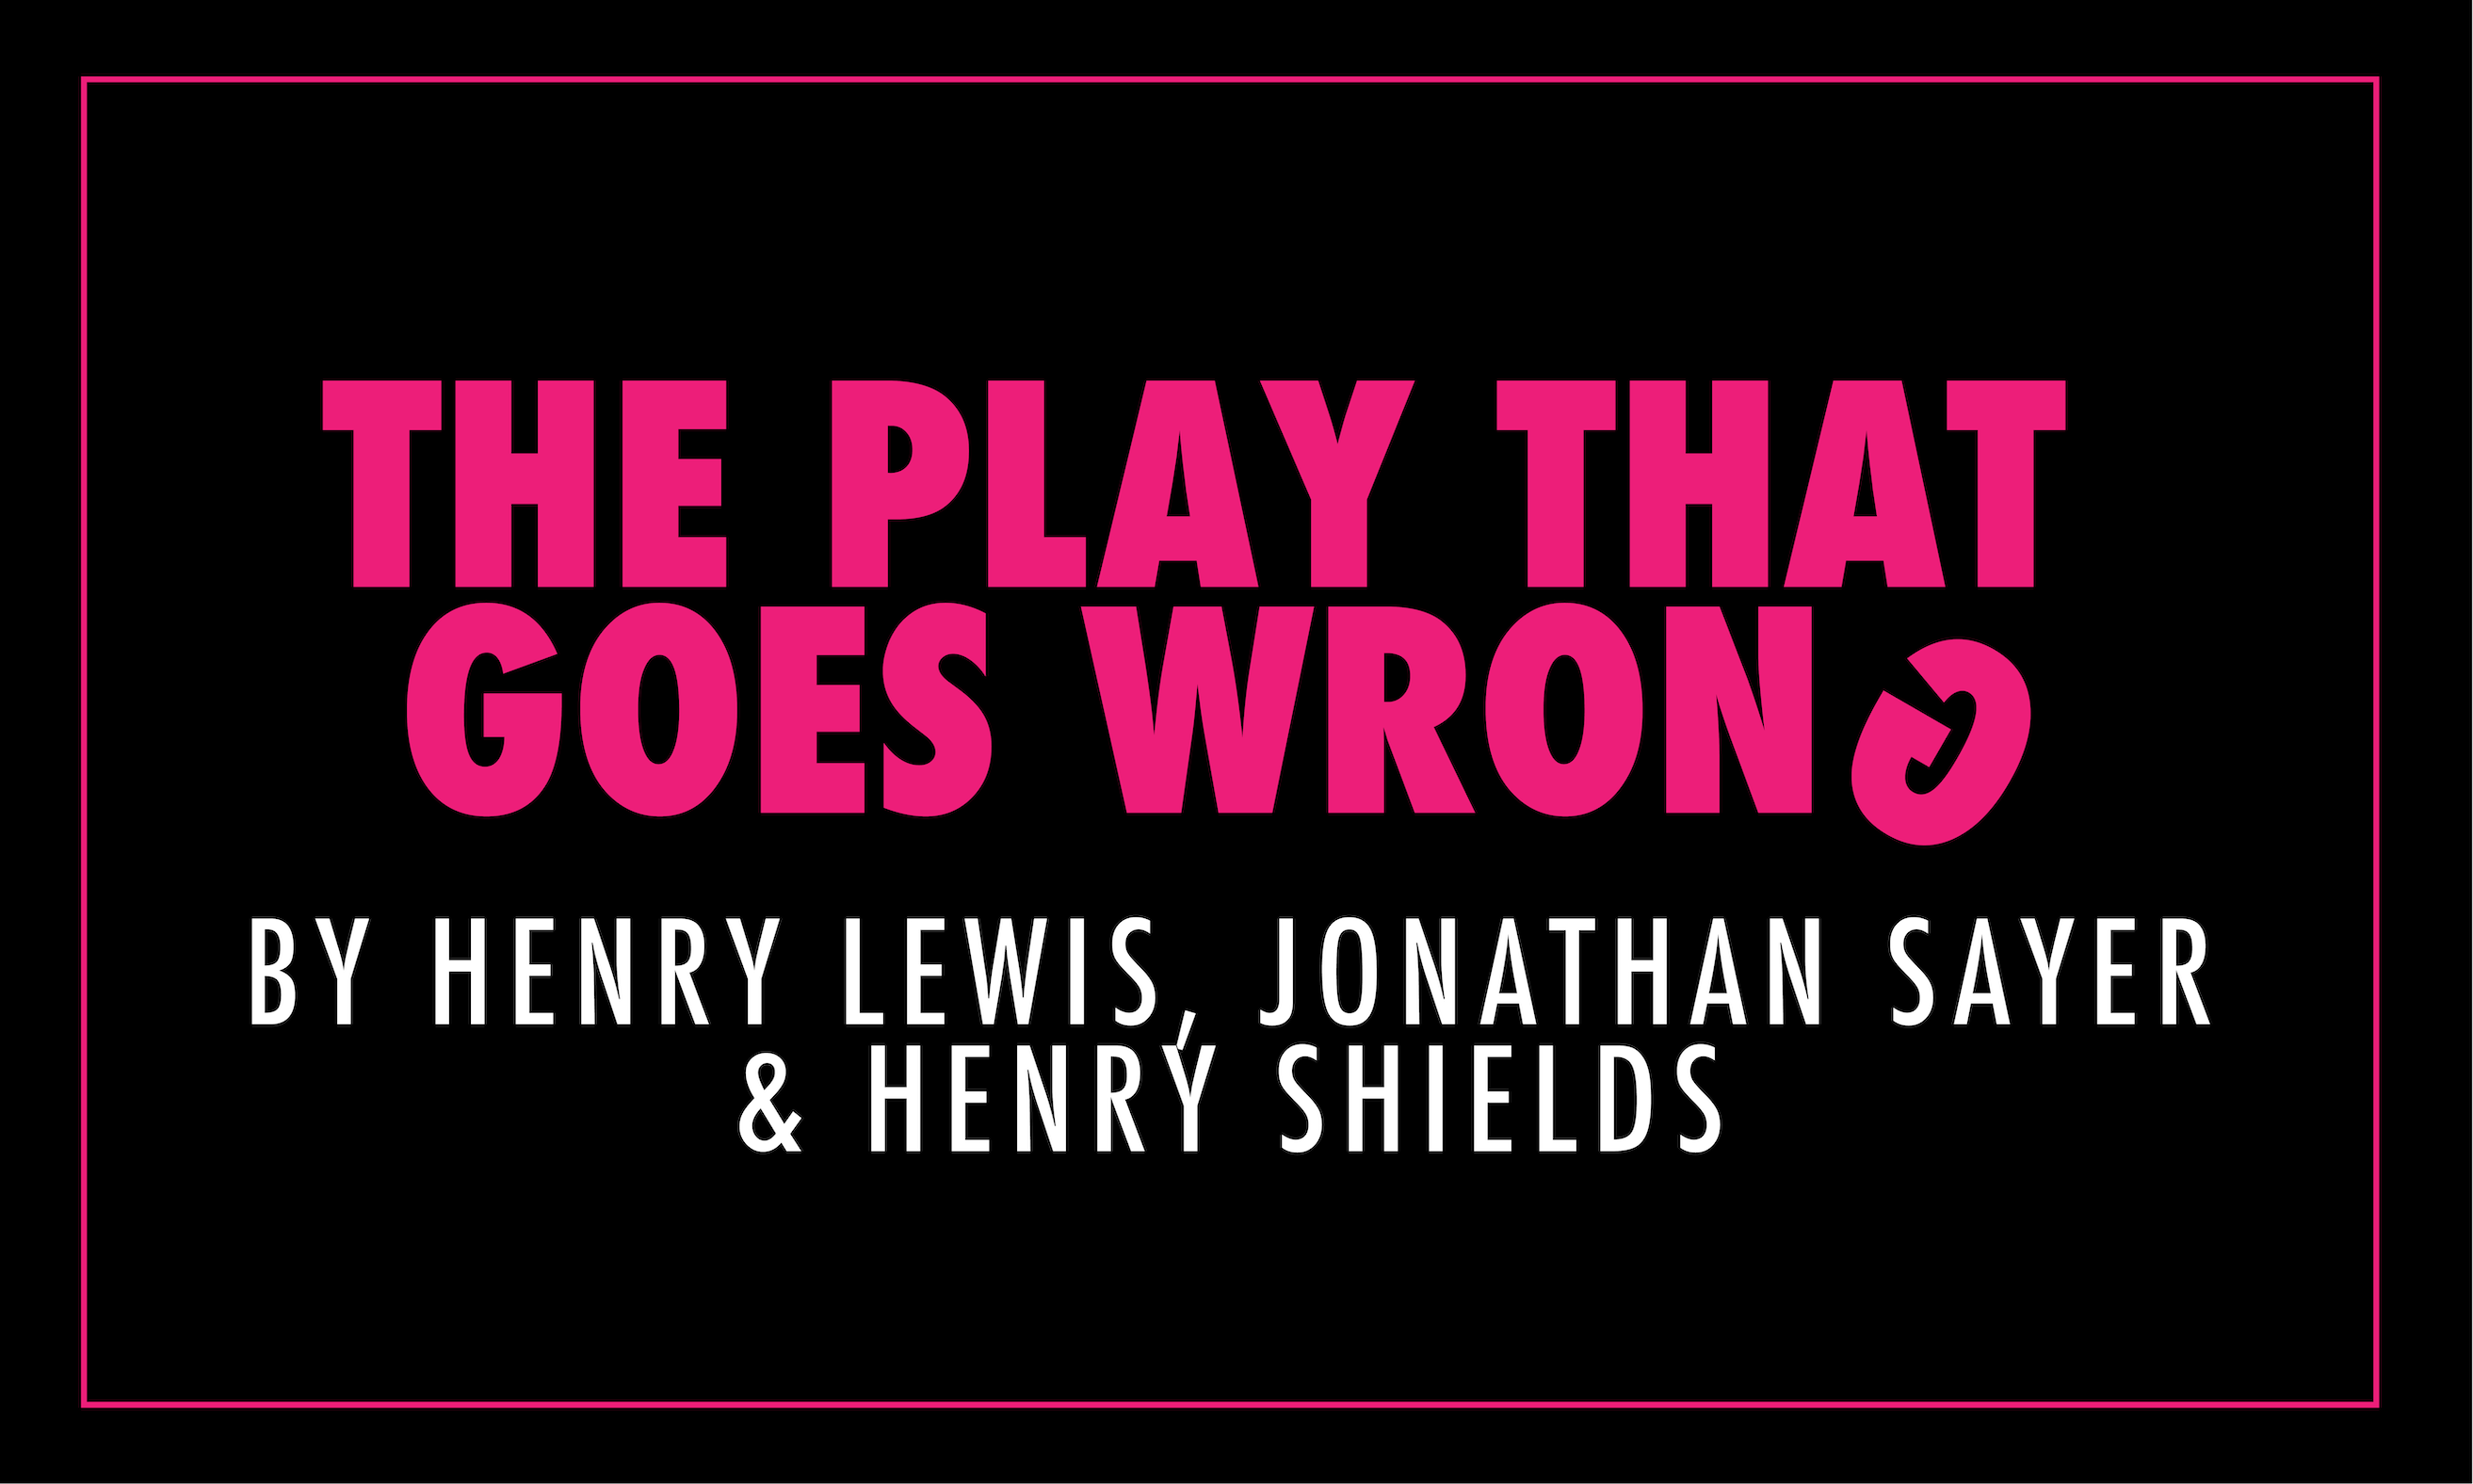 THE PLAY THAT GOES WRONG